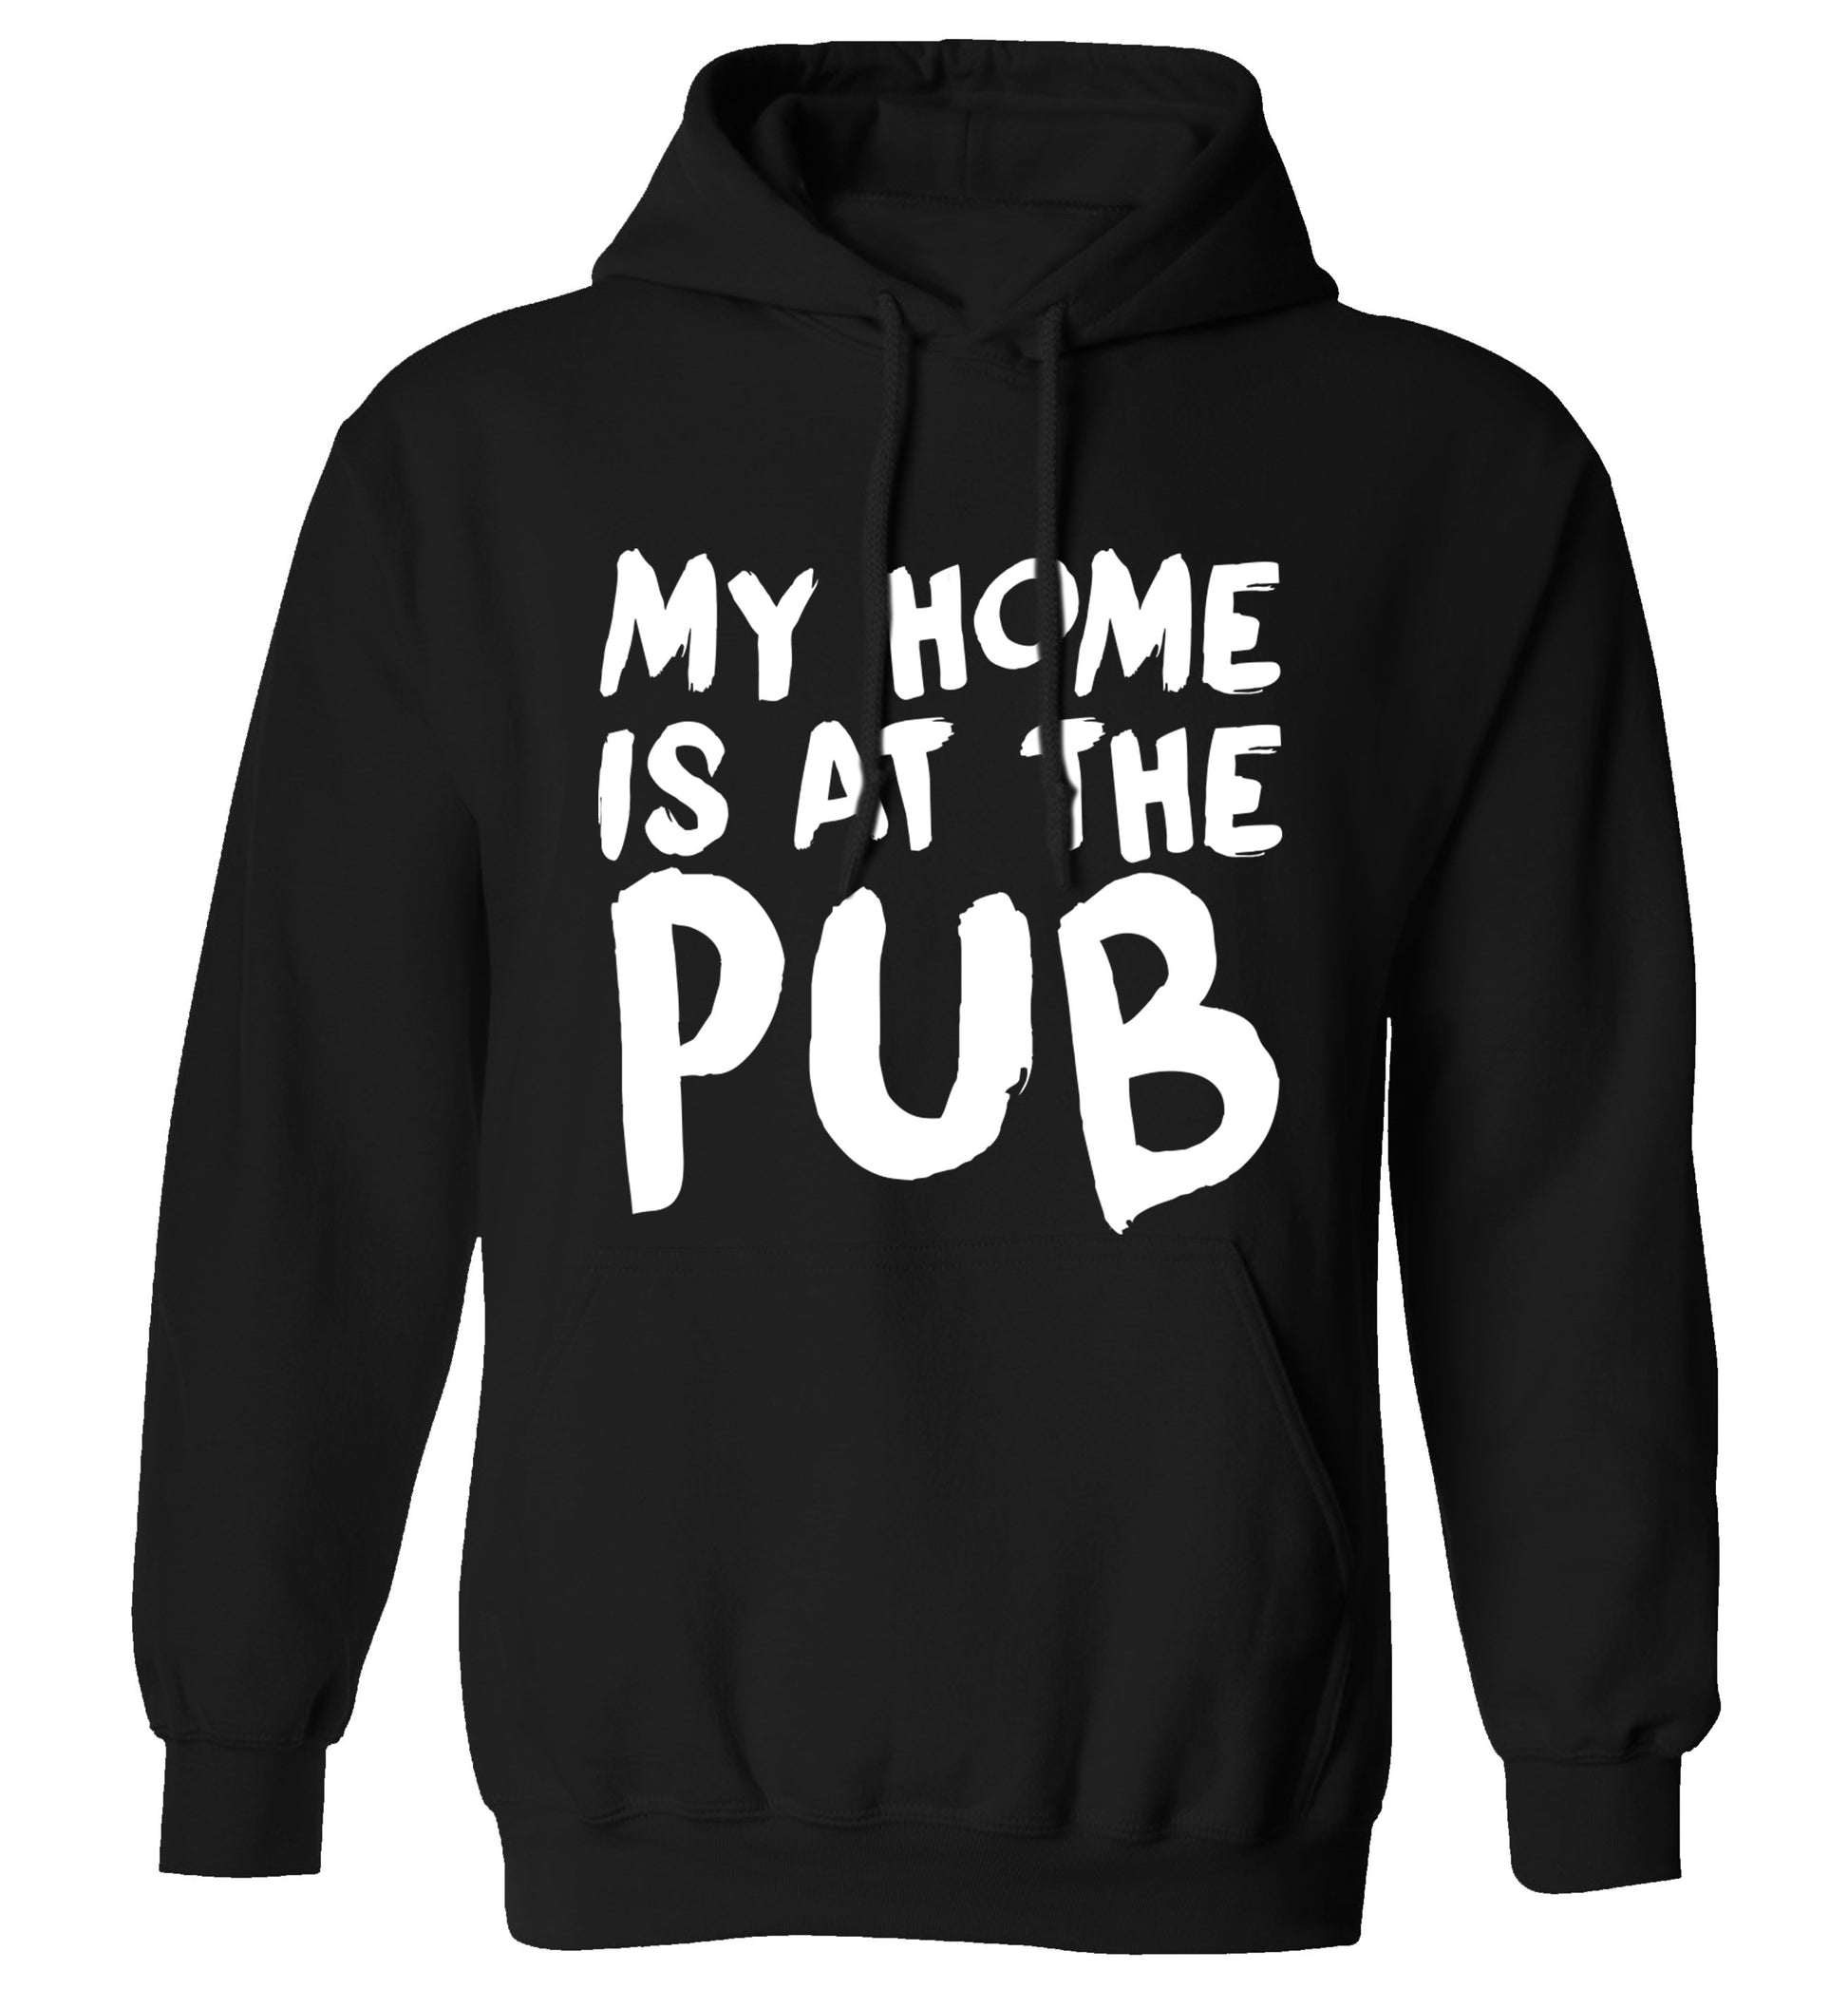 My home is at the pub adults unisex black hoodie 2XL